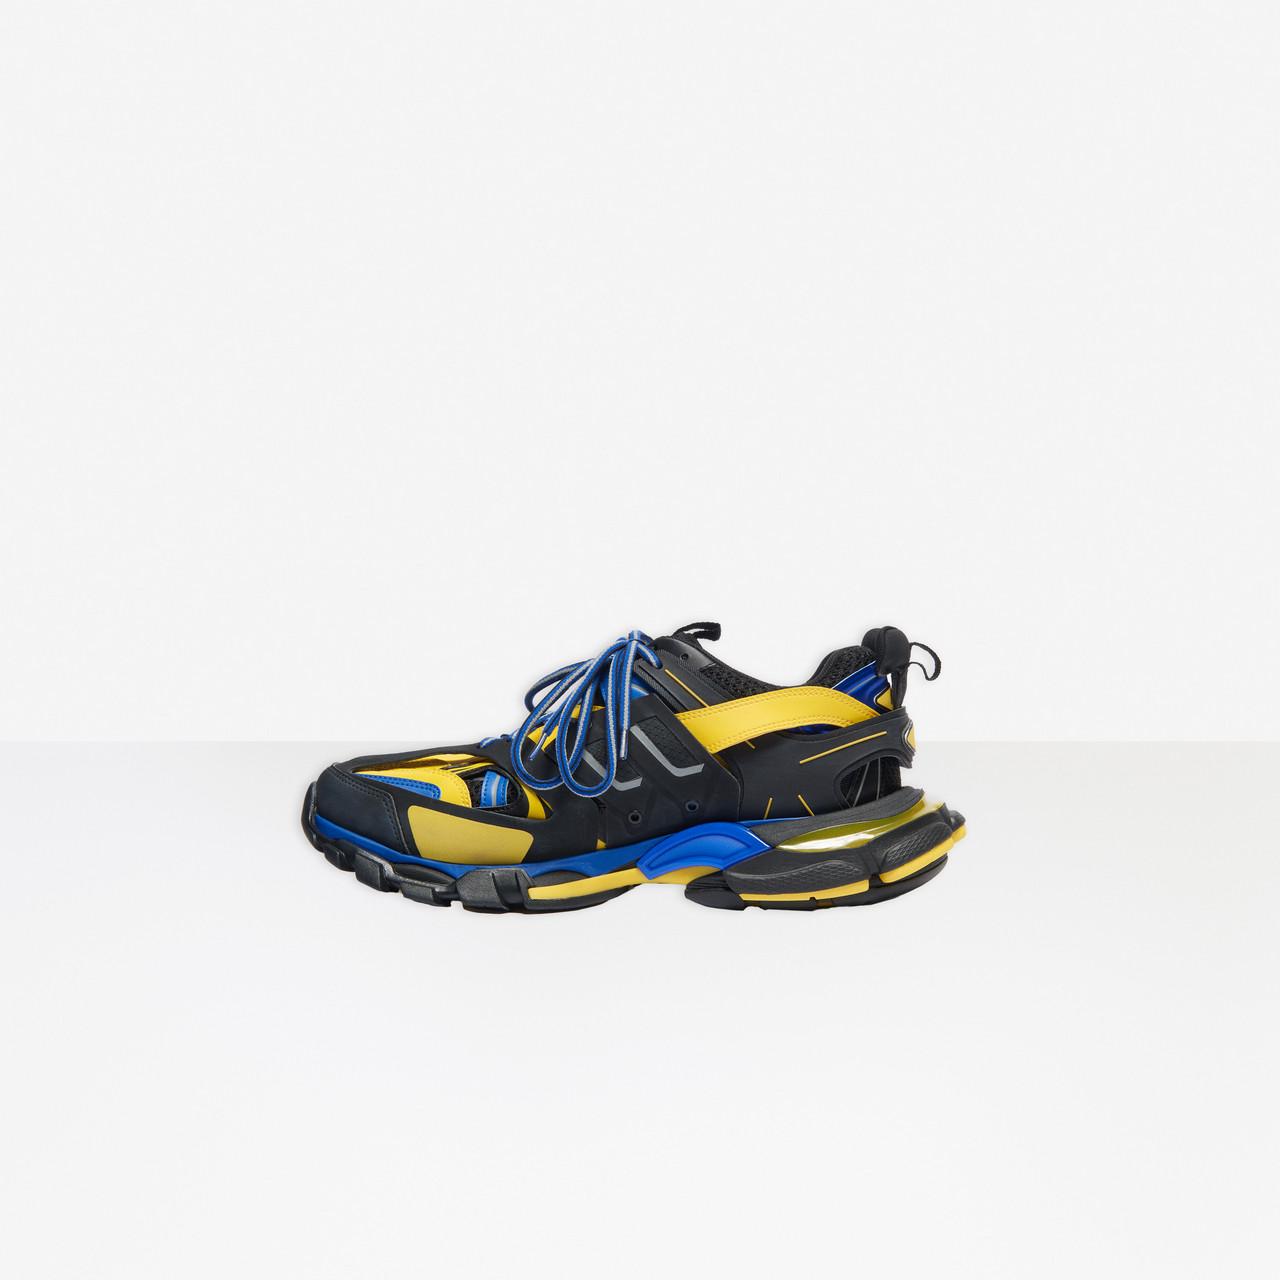 Balenciaga Synthetic Track Sneaker in Black Yellow Blue (Blue) for Men -  Lyst